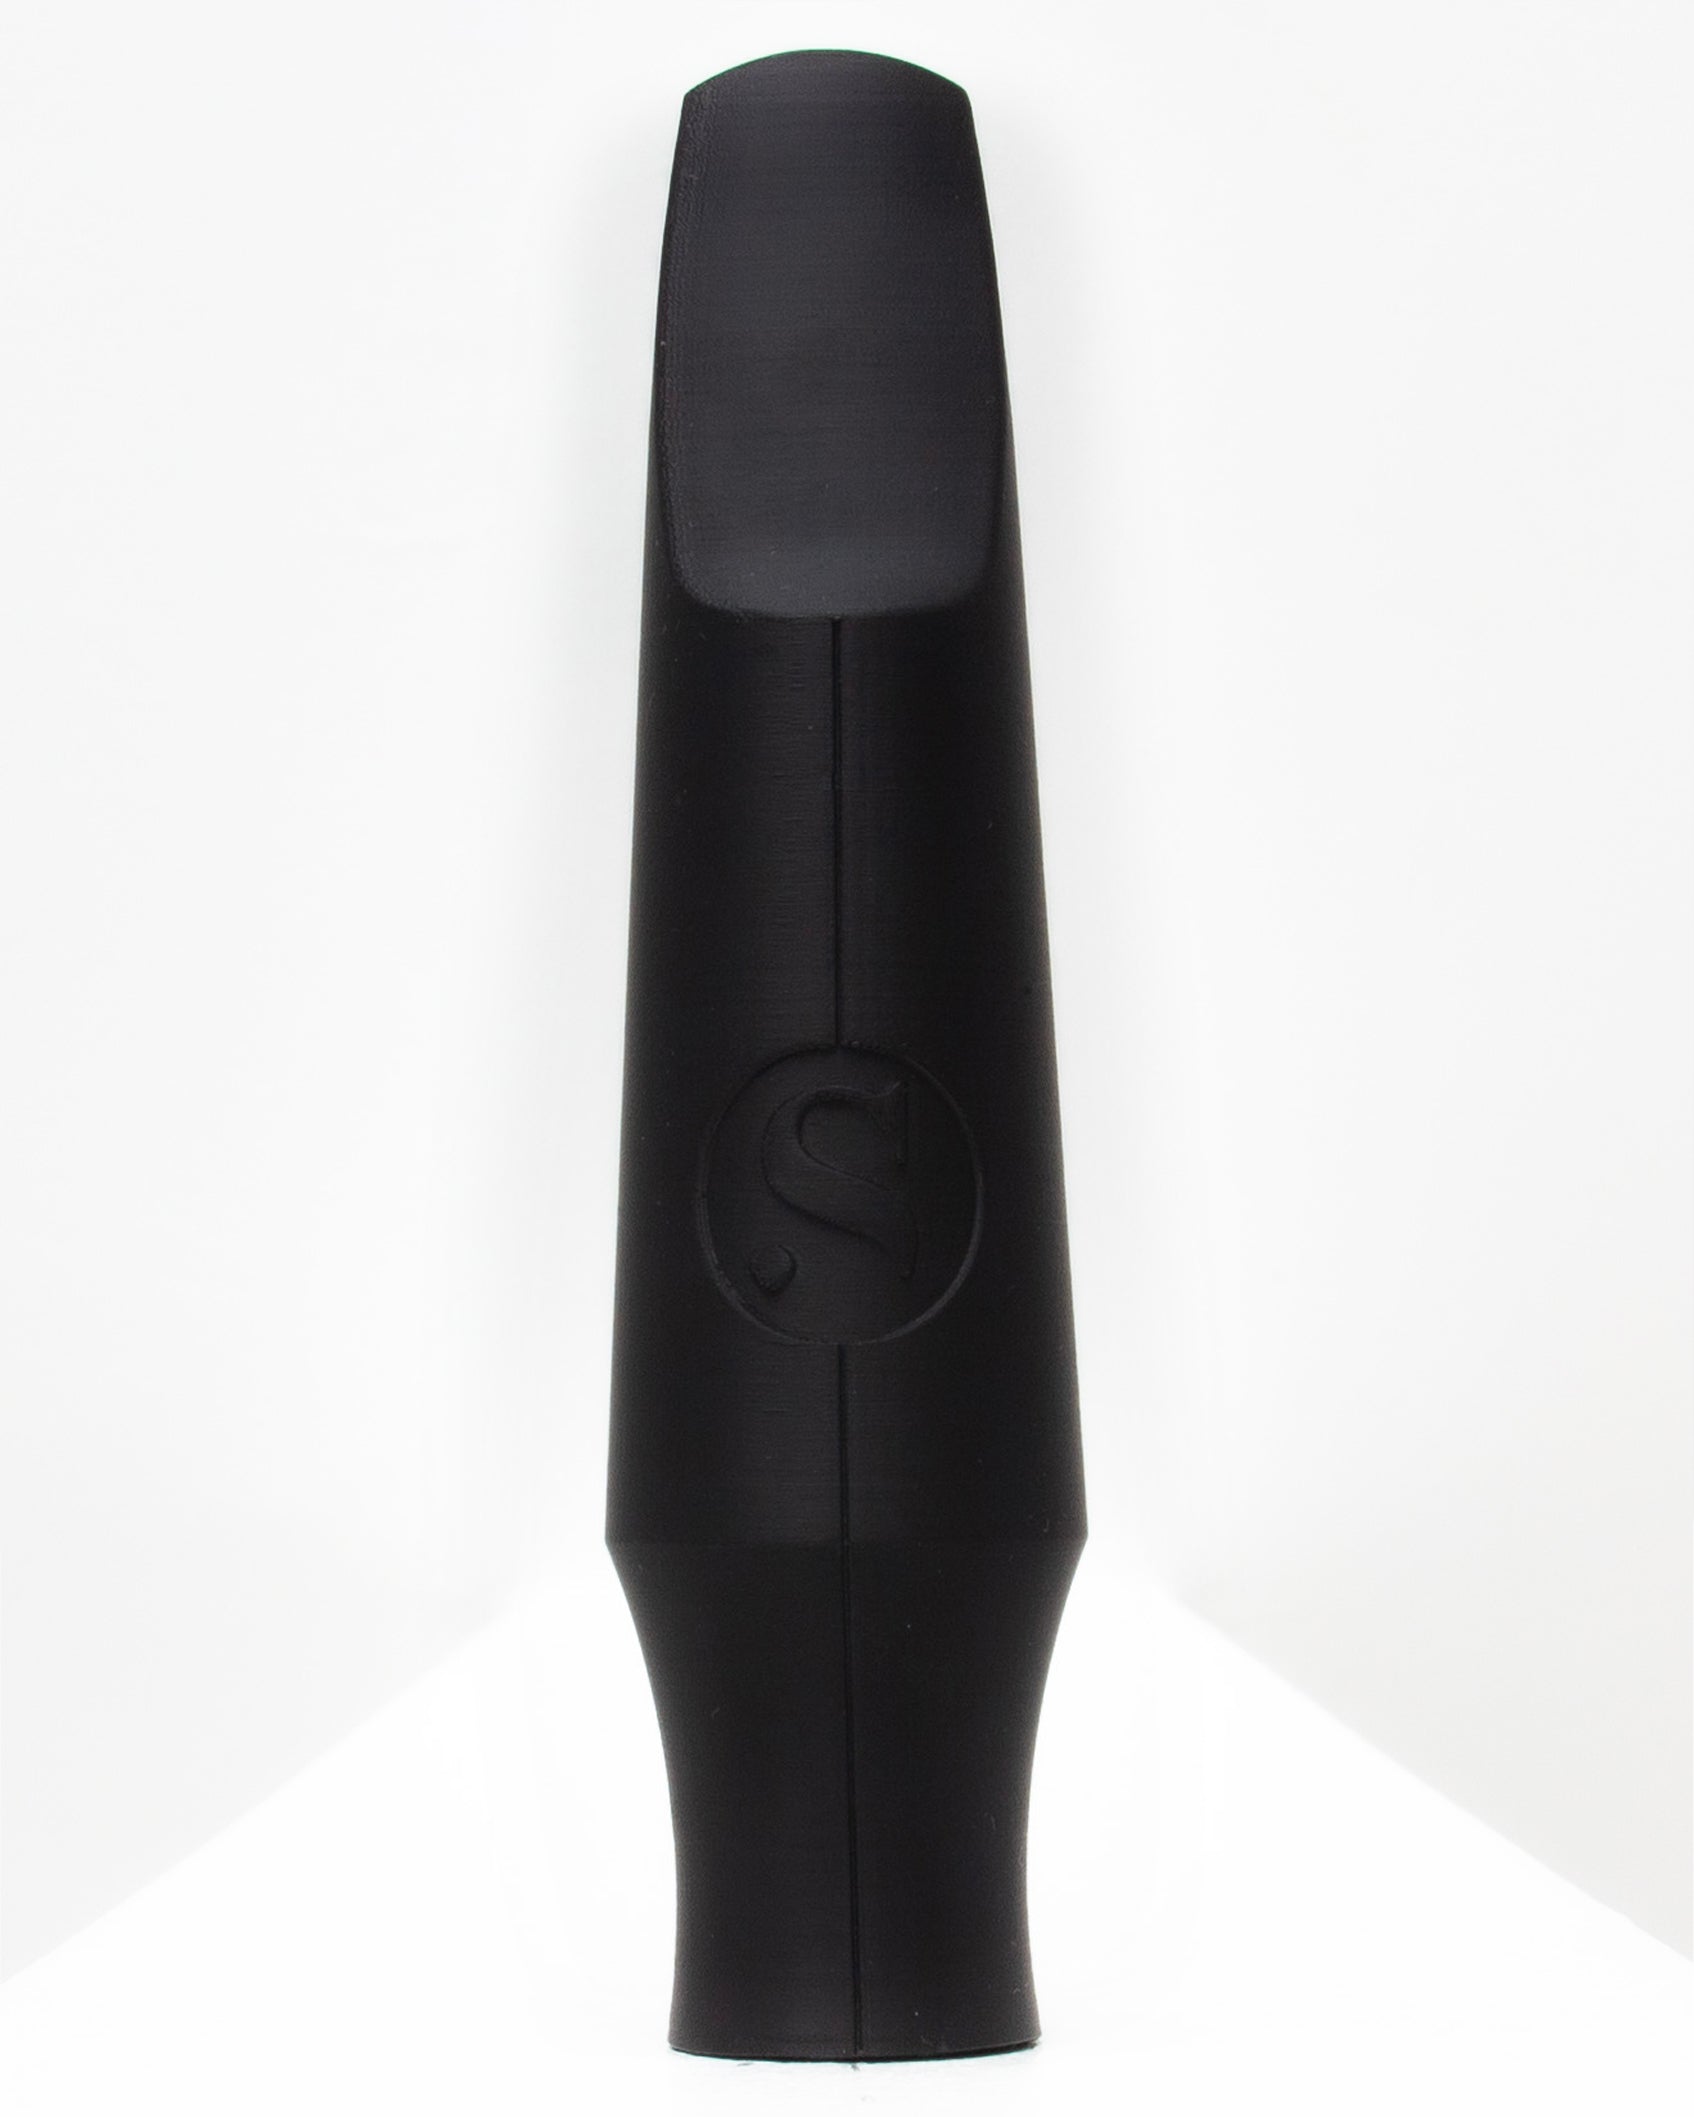 Baritone Originals Saxophone mouthpiece - Steady by Syos - 8 / Pitch Black